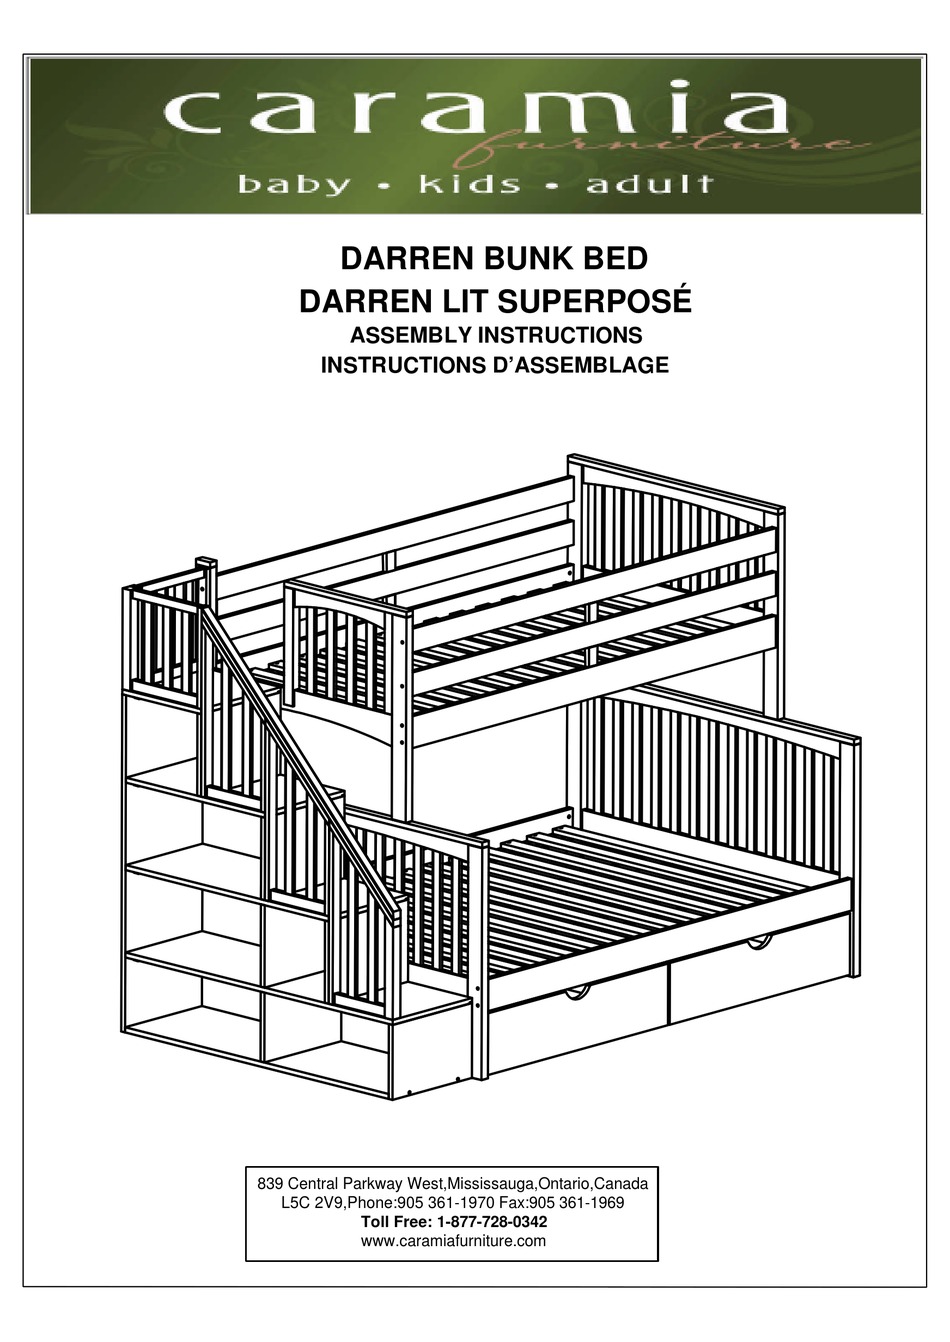 Caramia Darren Bunk Bed Assembly, Discovery Bunk Bed Assembly Instructions